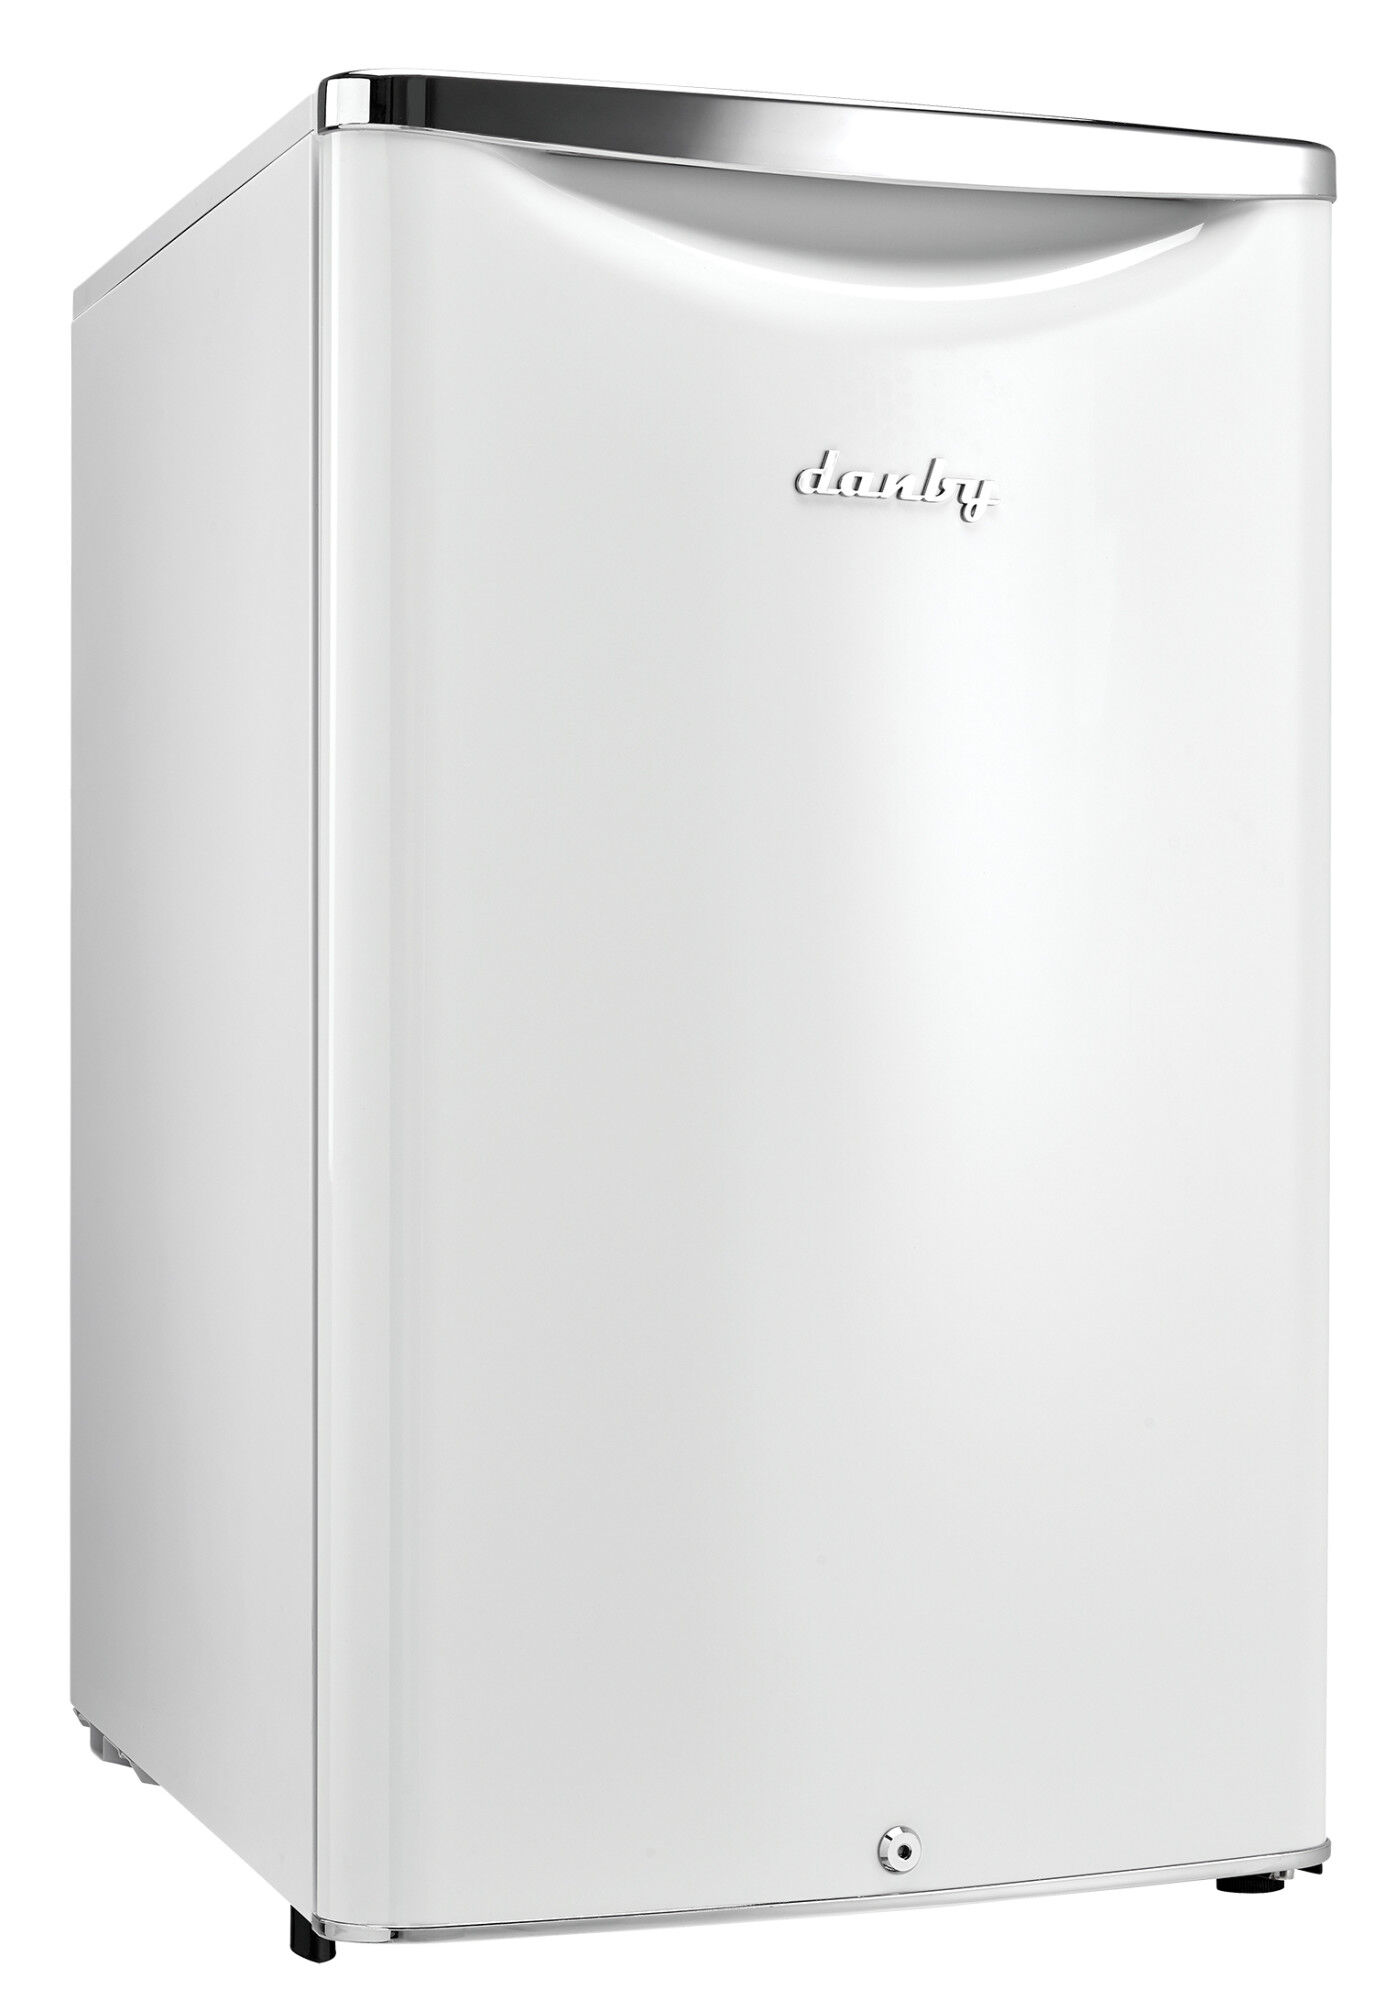 Danby DAR044A6 21 Inch Wide 4.4 Cu. Ft. Energy Star Free Standing Compact Refrigerator with LED Interior Lighting and CanStor Pearl White